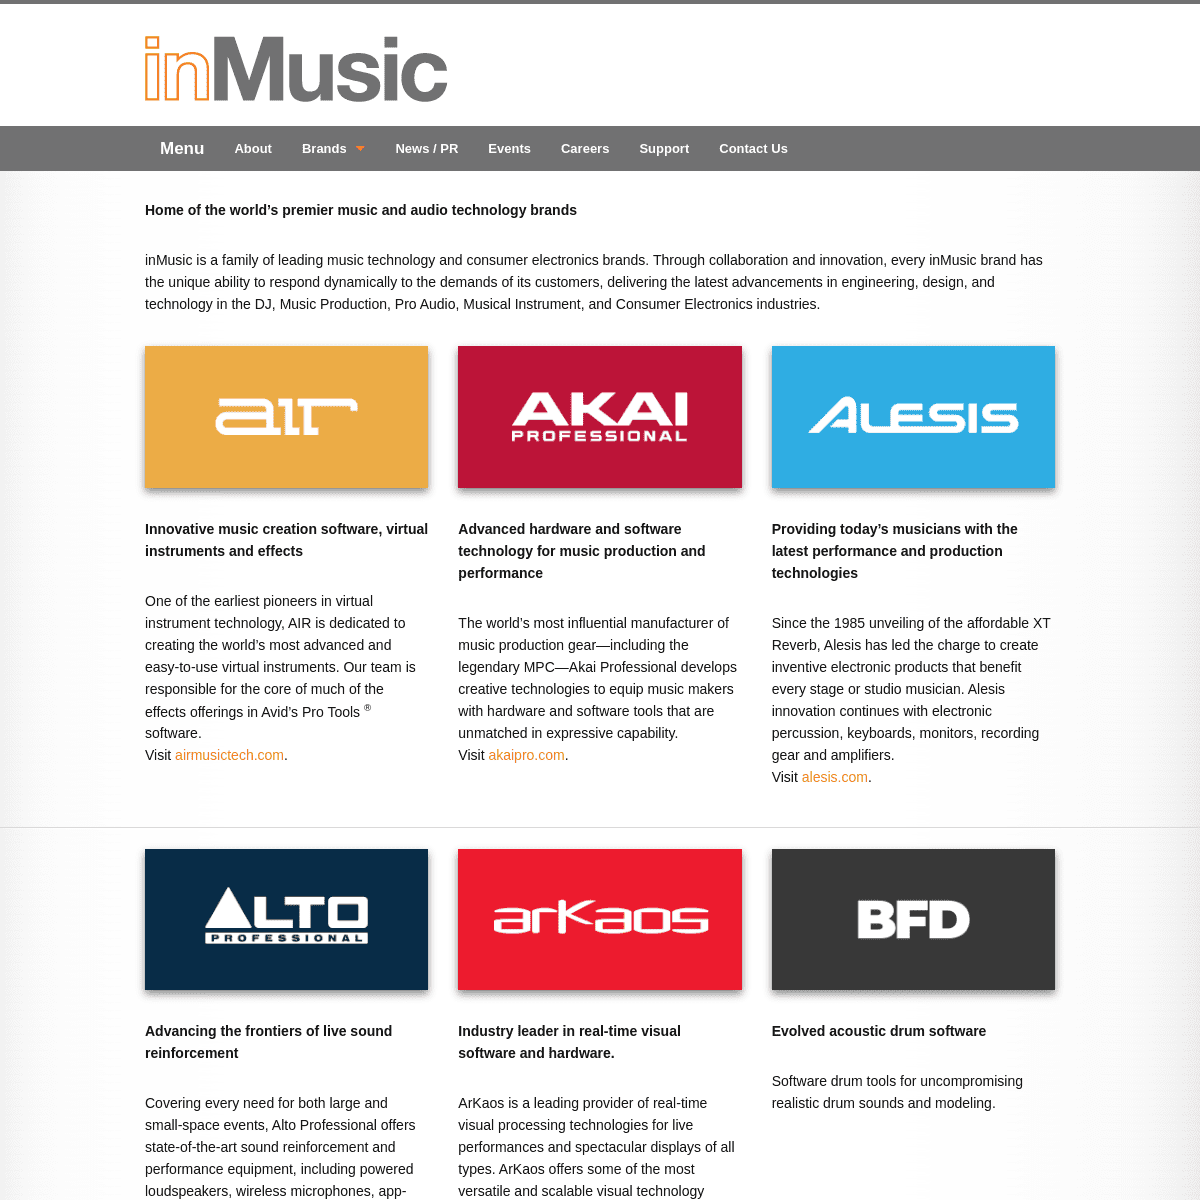 A complete backup of https://inmusicbrands.com